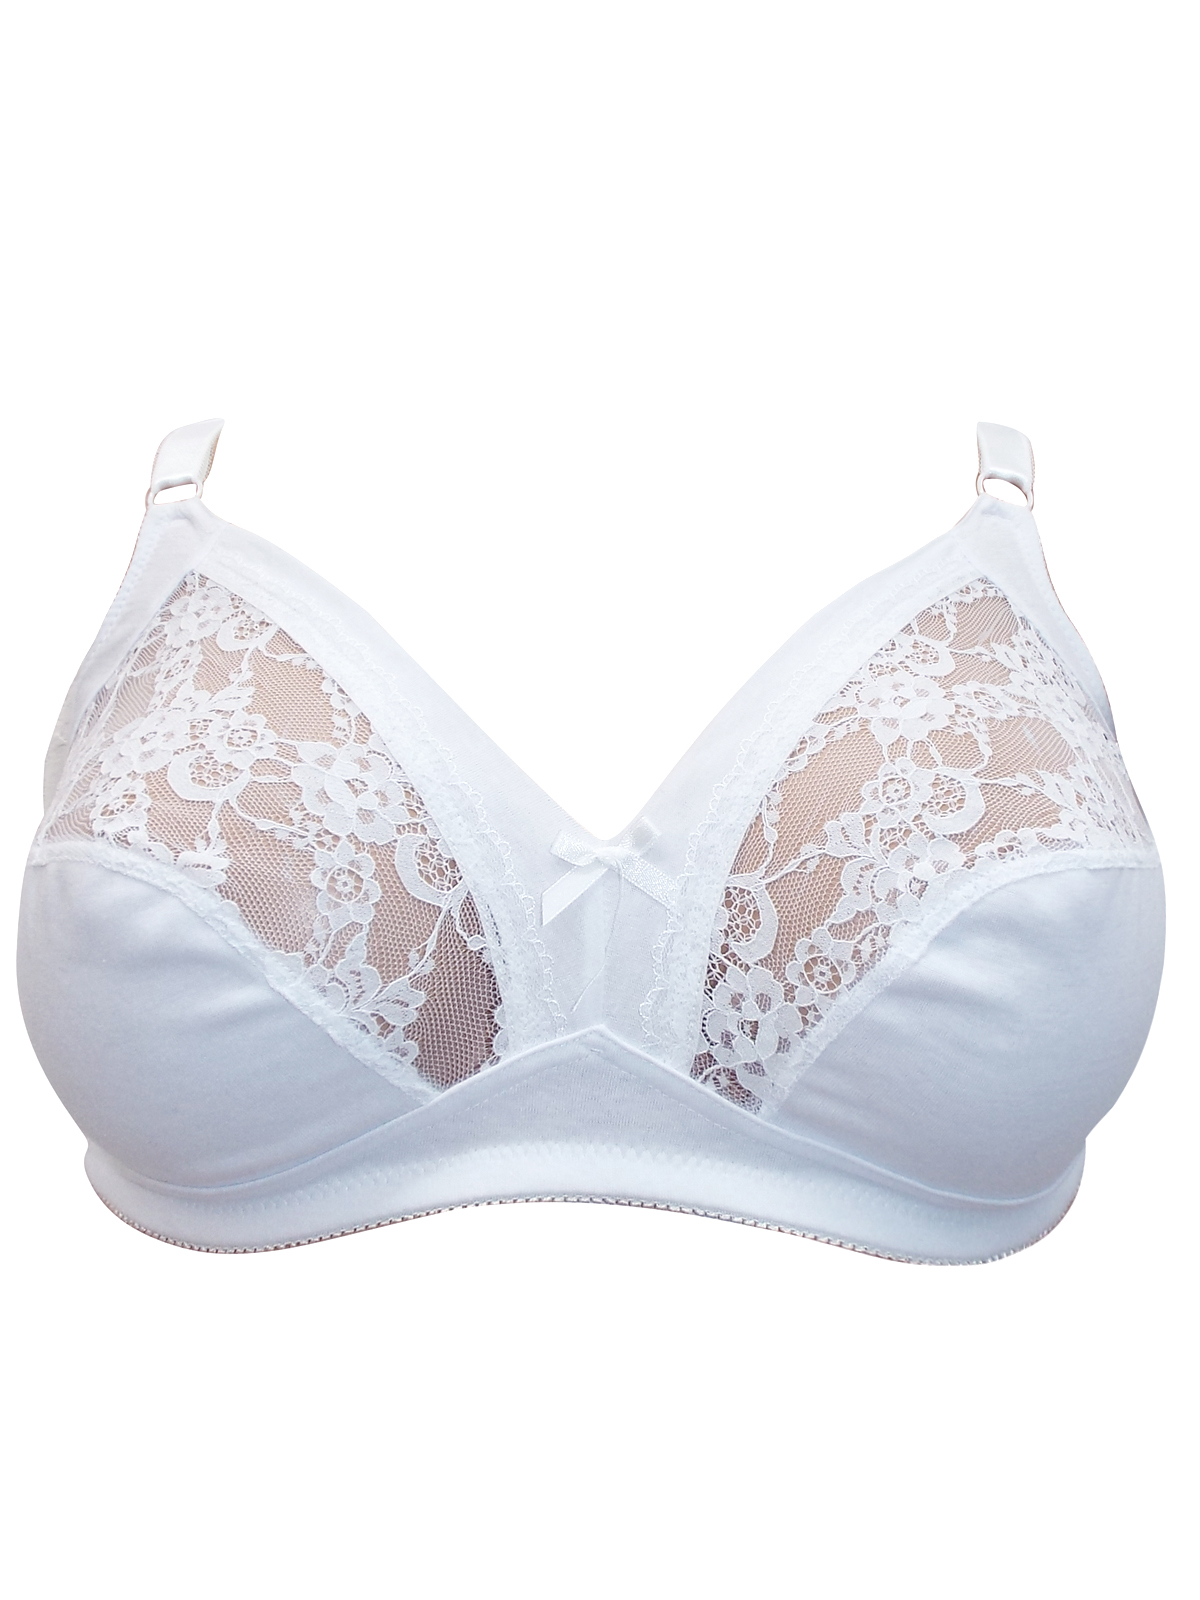 Naturana Naturana White Floral Lace Full Cup Bra Size 34 To 46 B C D Dd